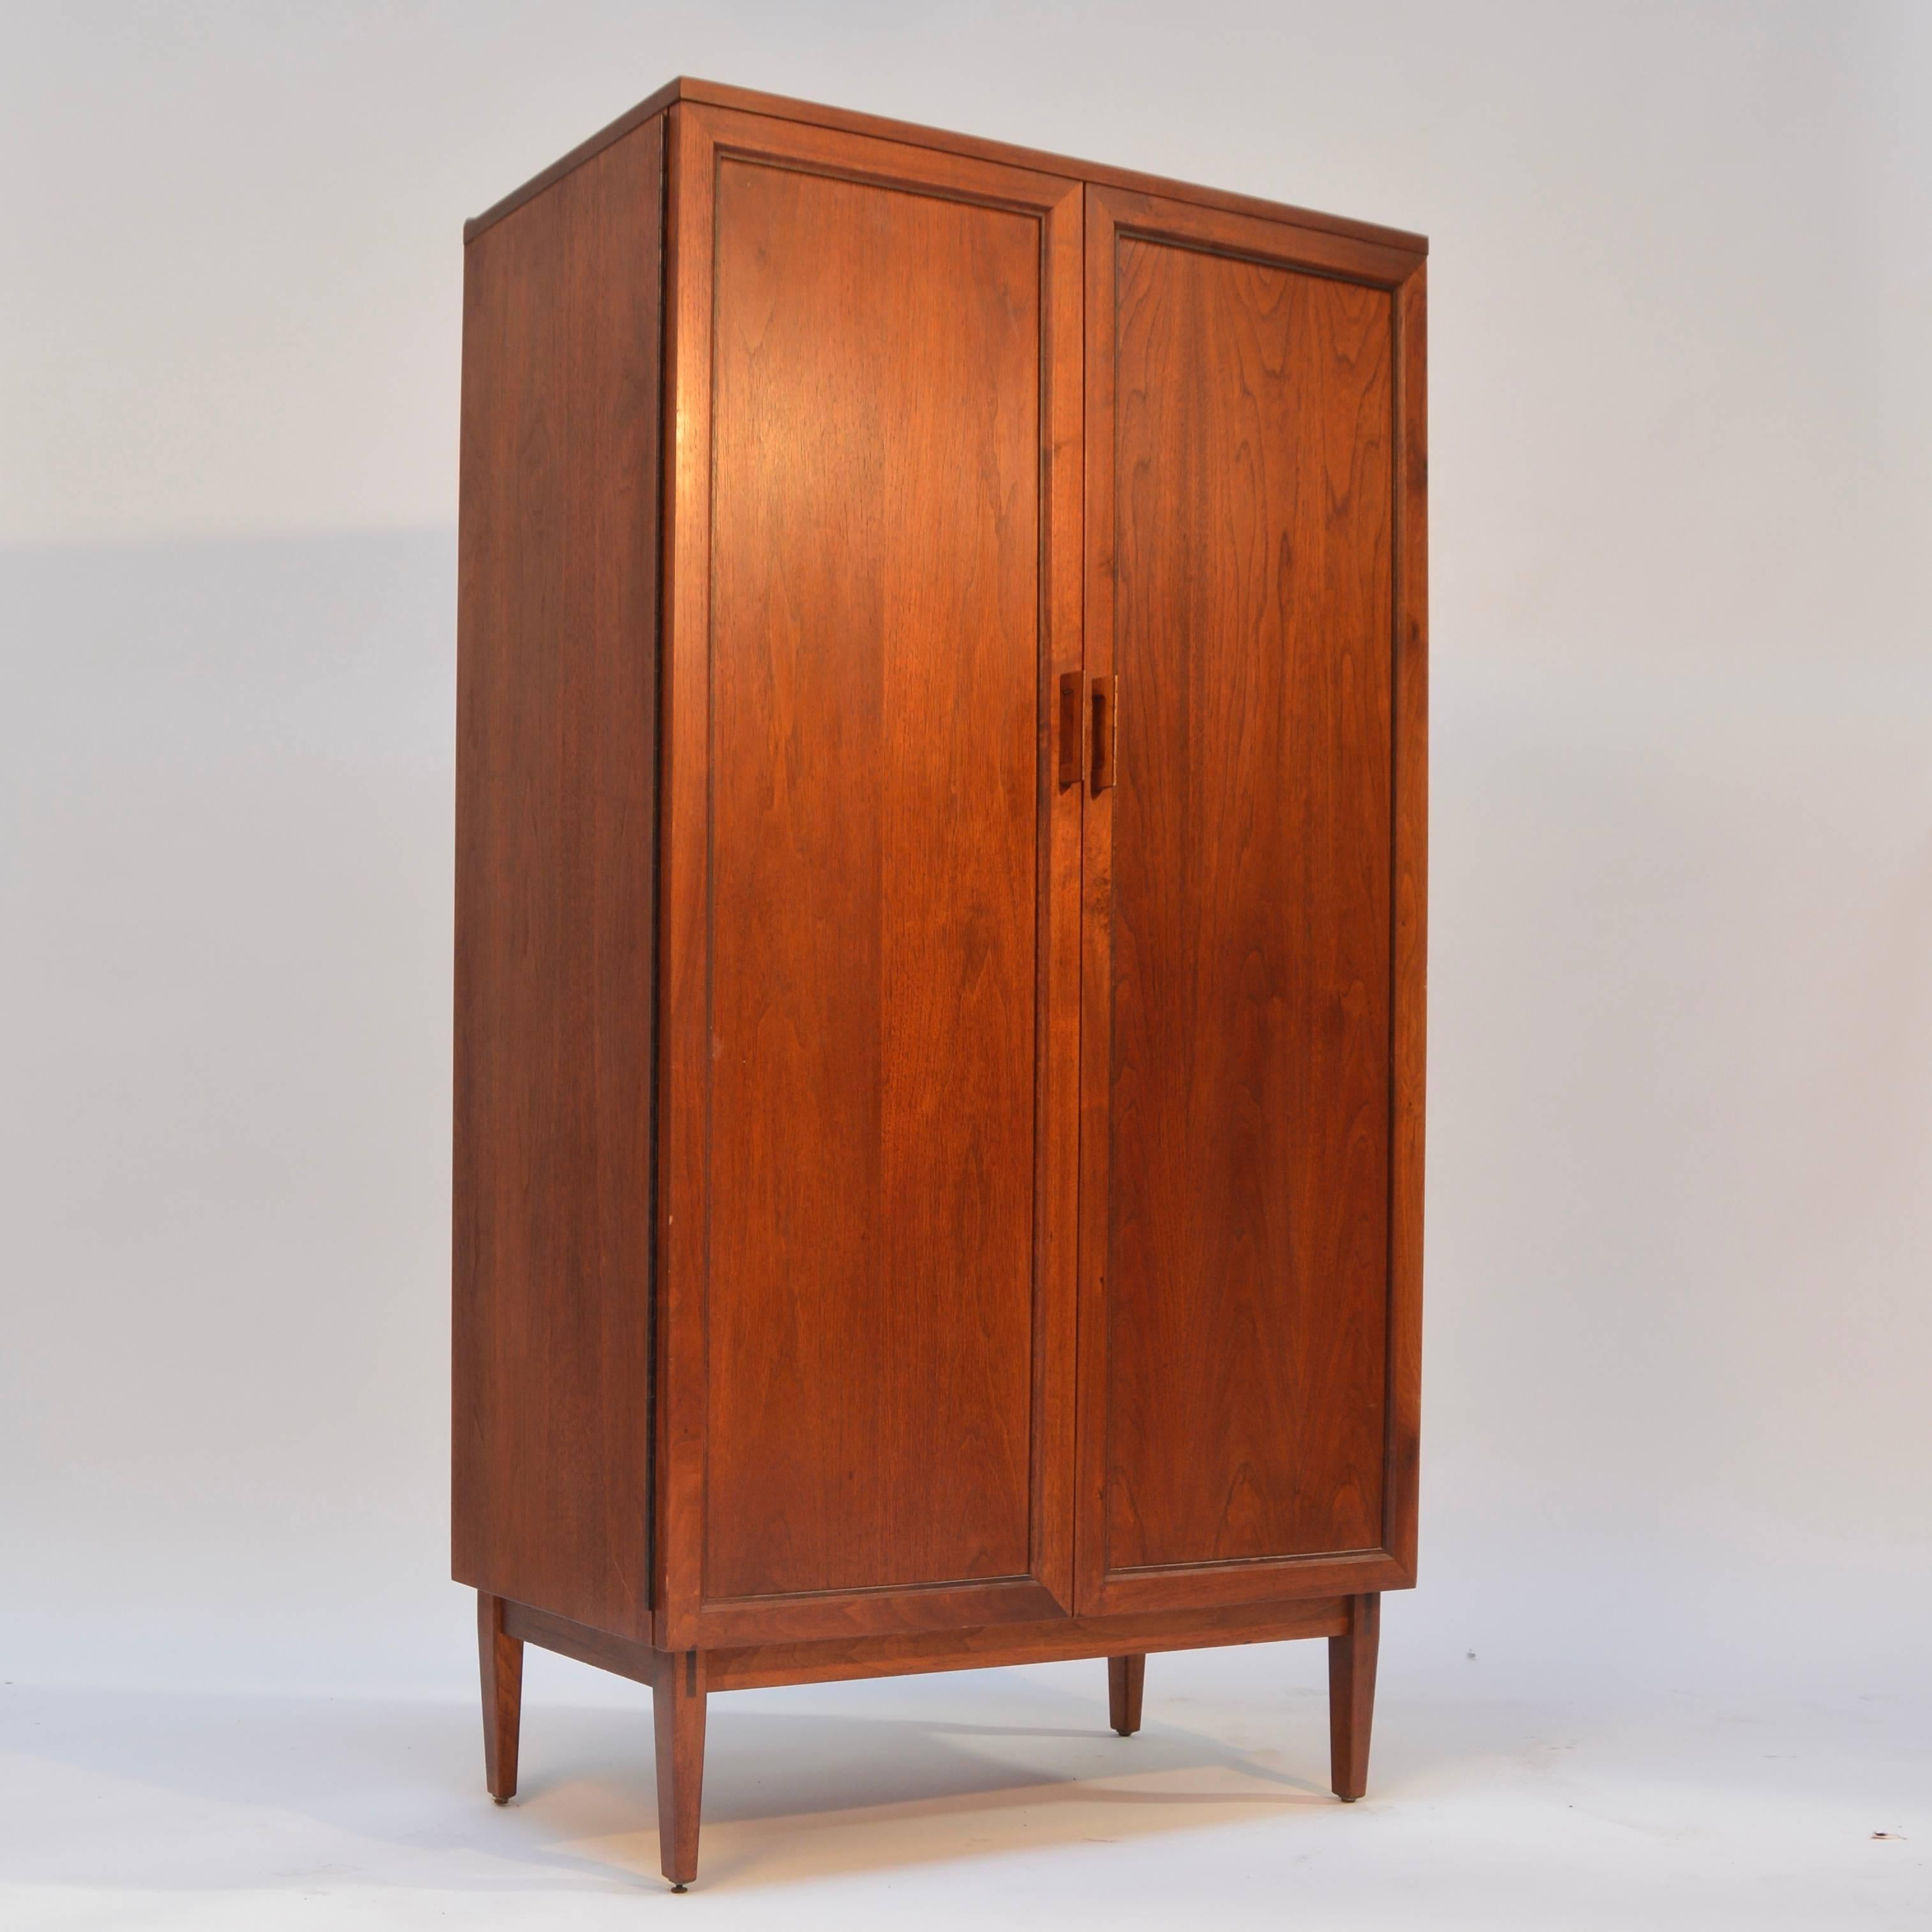 These are amazing and very rare matching dressers designed by Kipp Stewart and Stewart McDougall for Directional and crafted by Calvin.
Both retain the original manufacturer's label in the interior of the drawer.
Priced and sold separately.
UPDATE: